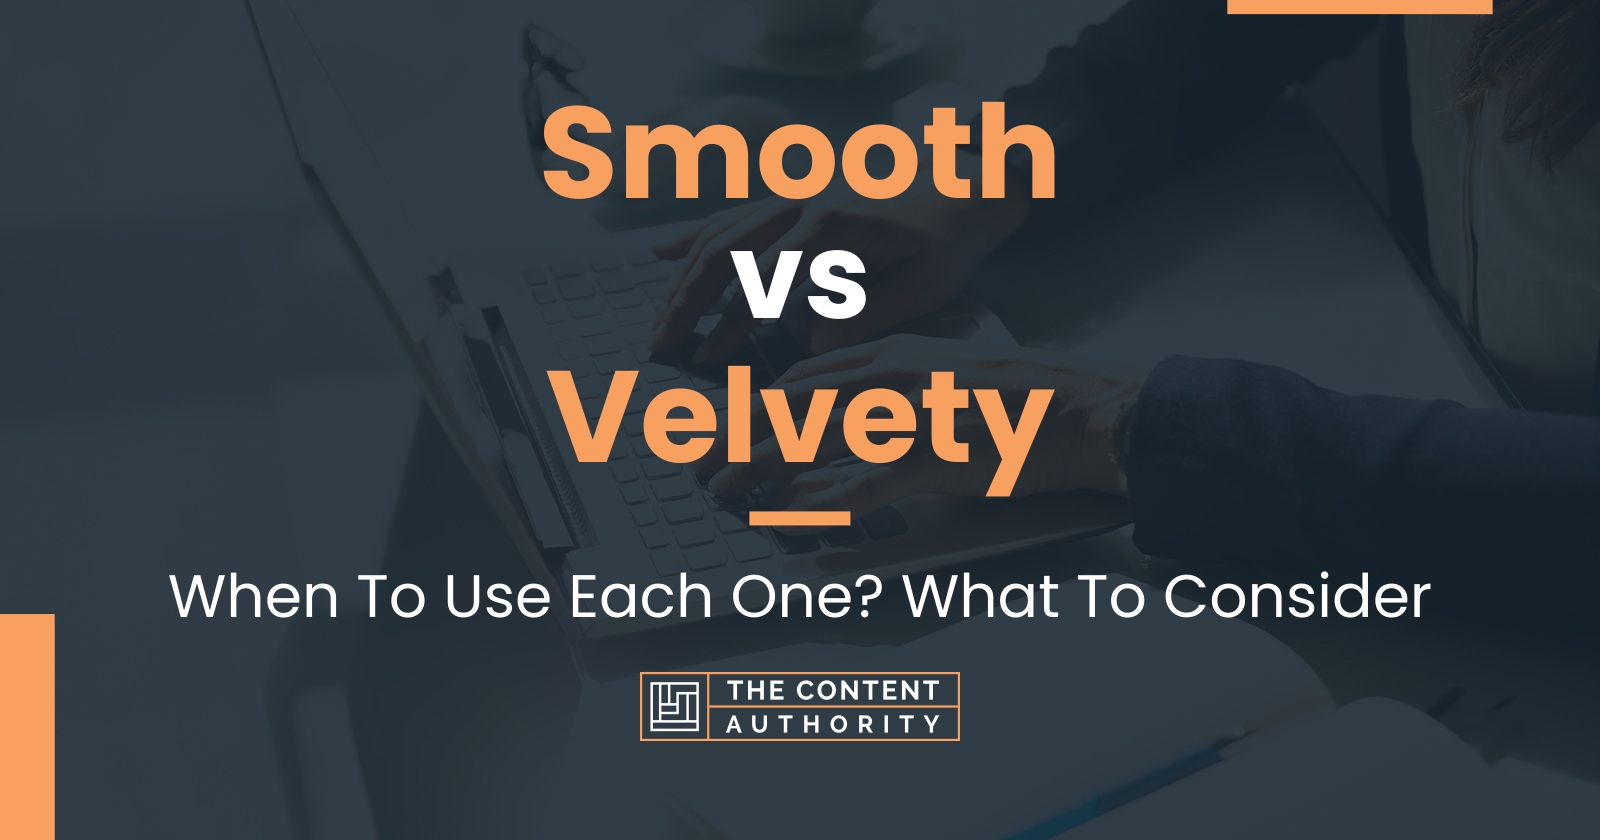 Smooth vs Velvety: When To Use Each One? What To Consider